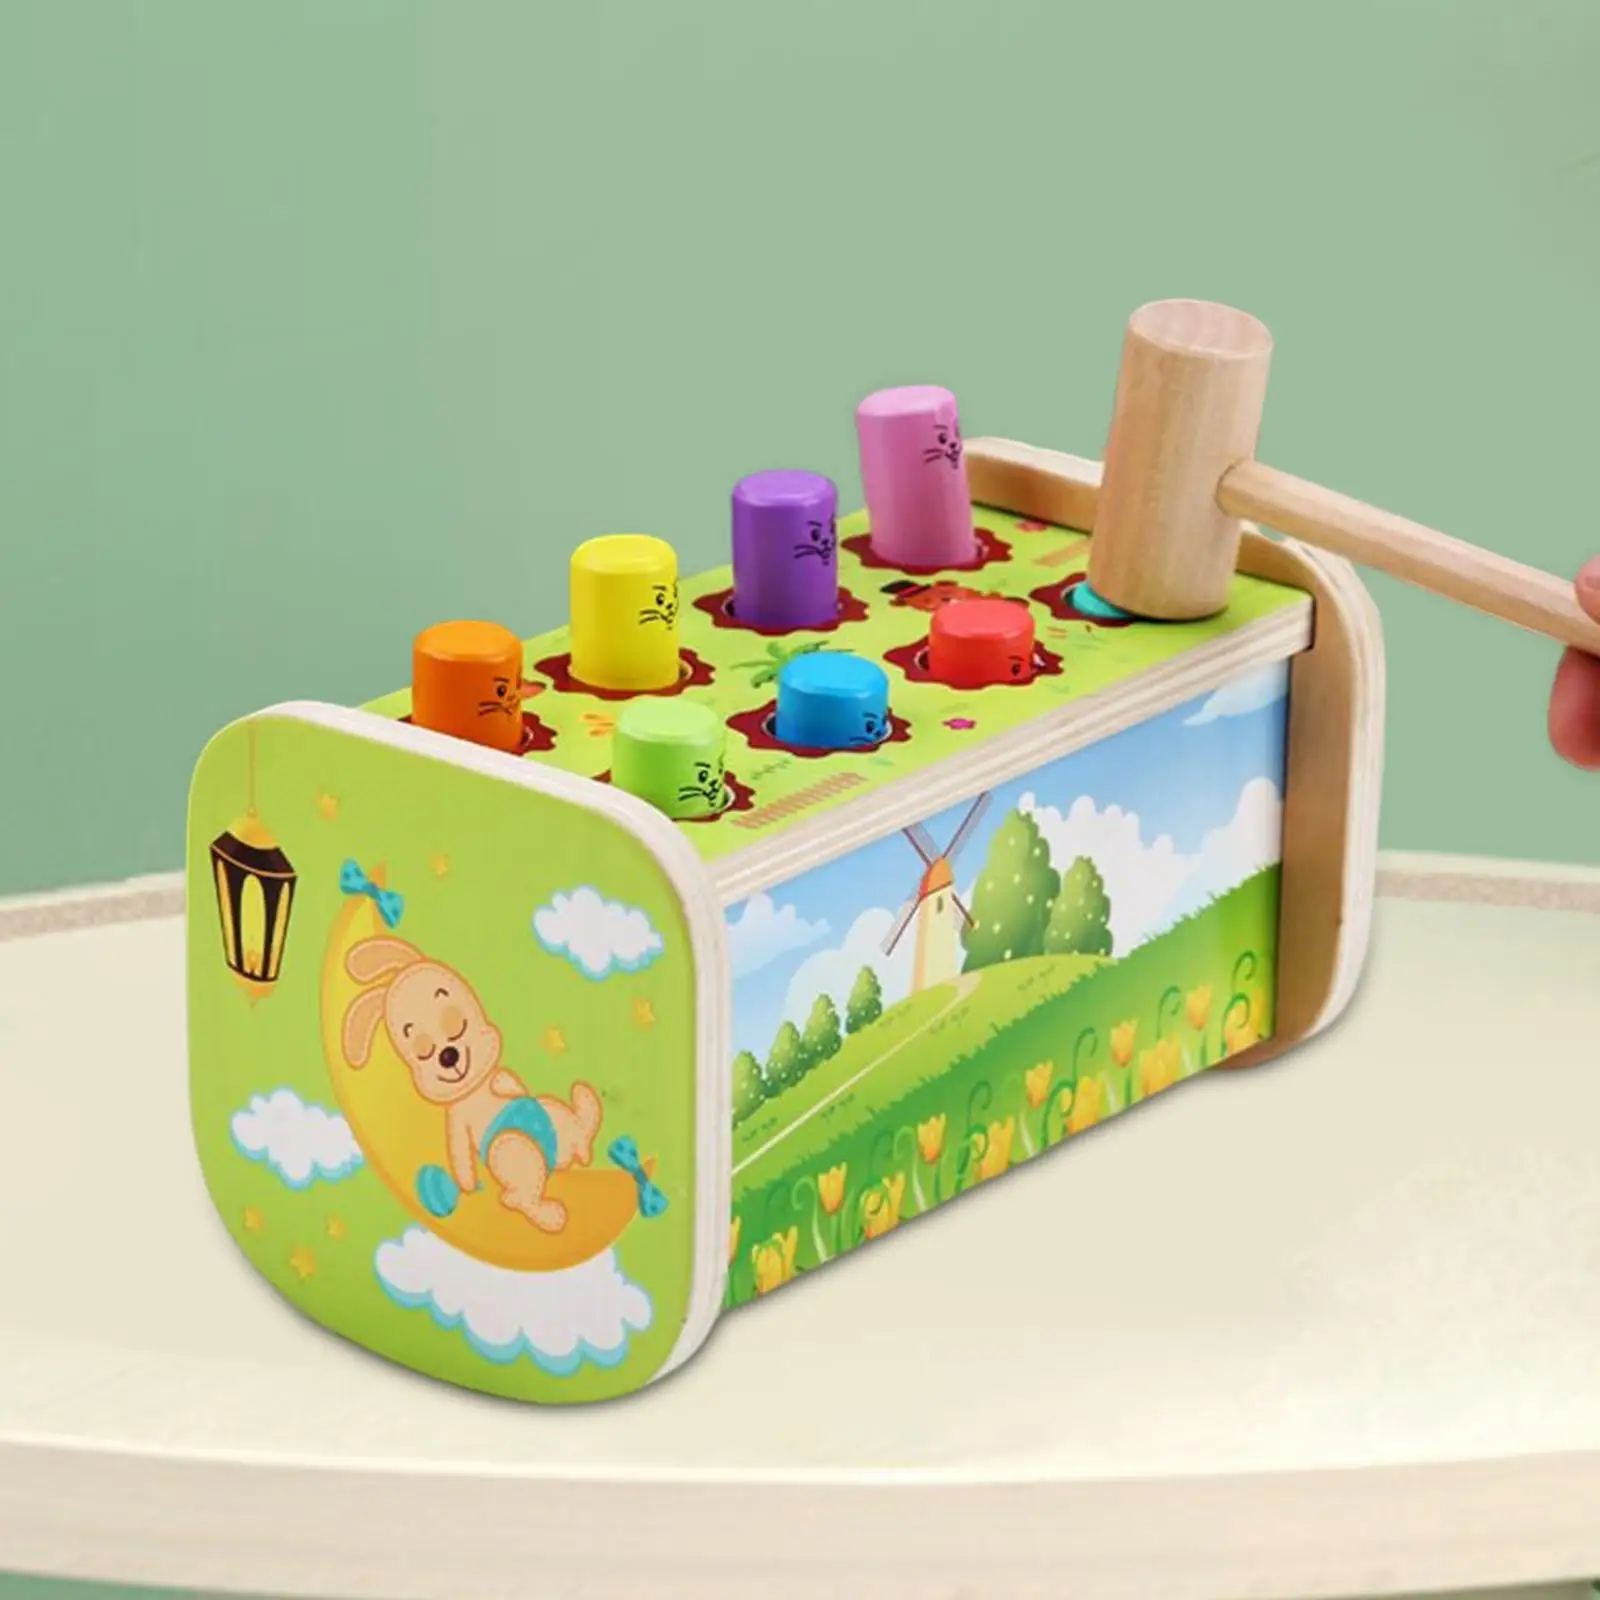 Montessori Pounding Bench with Pegs and Mallet Color Recognition for Girls Boys Infant Kids